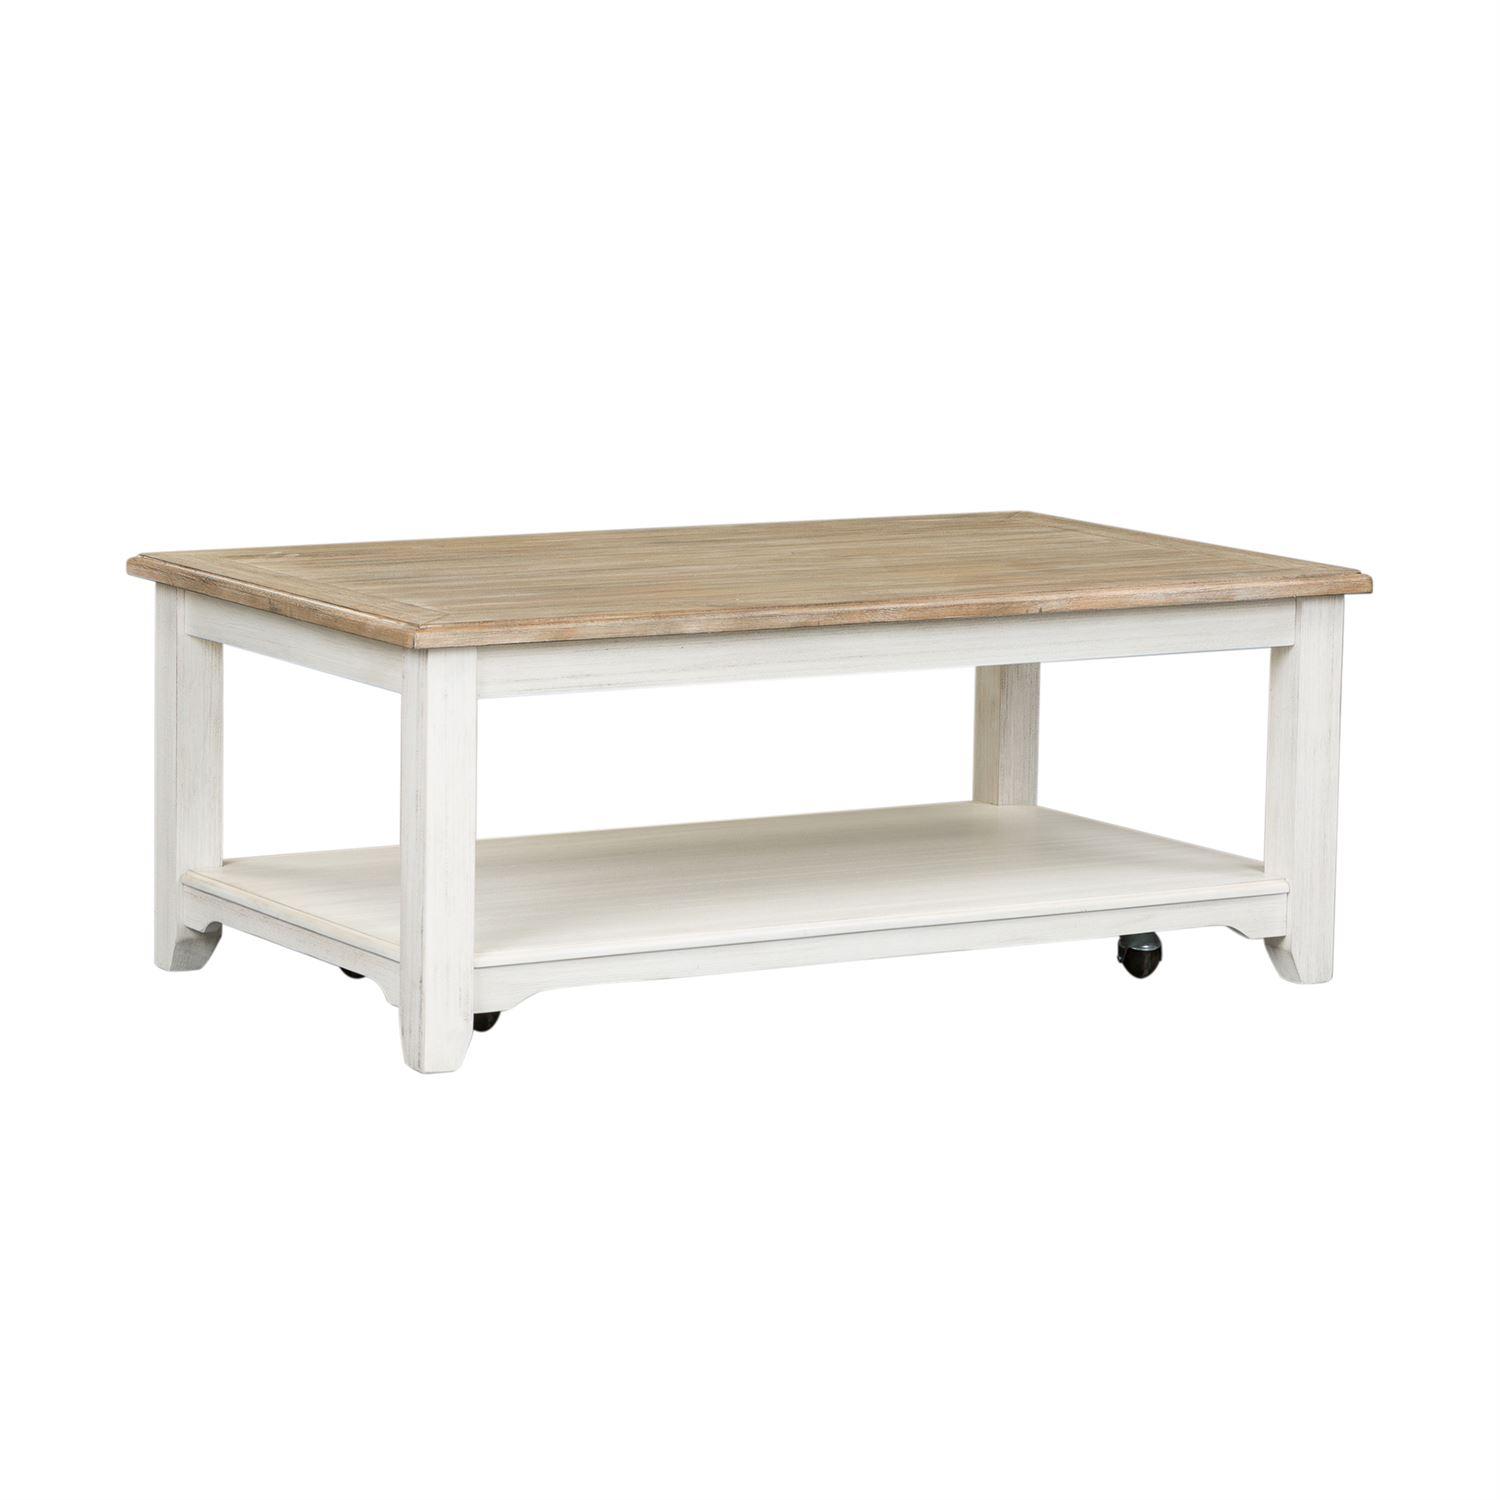 Transitional Coffee Table Summerville  (171-OT) Coffee Table 171-OT1010 in Cream, White 